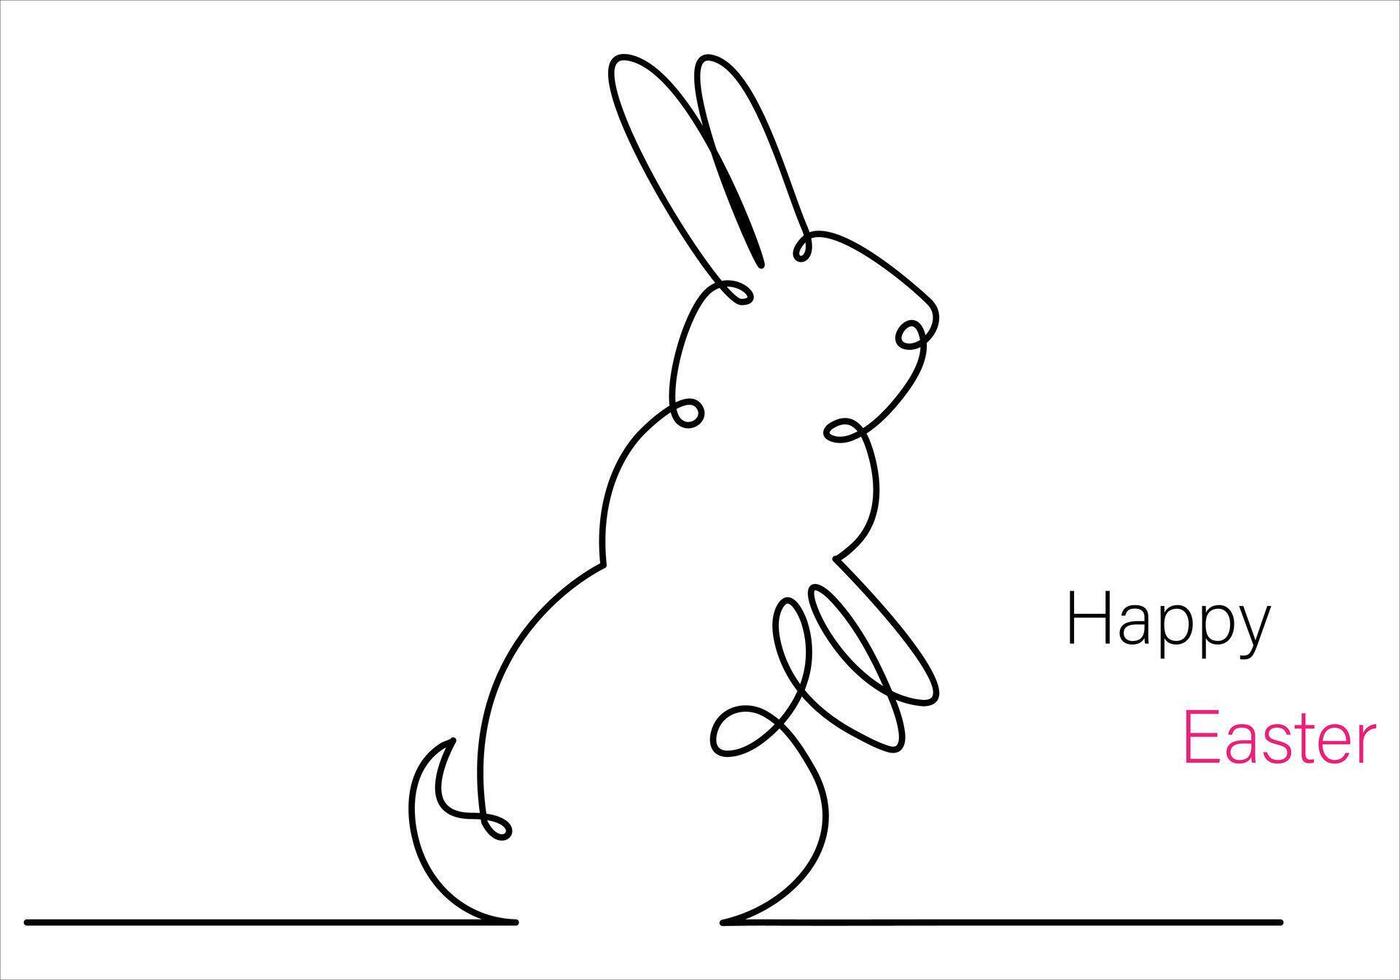 Continuous one line drawing of easter monday out line vector art illustration